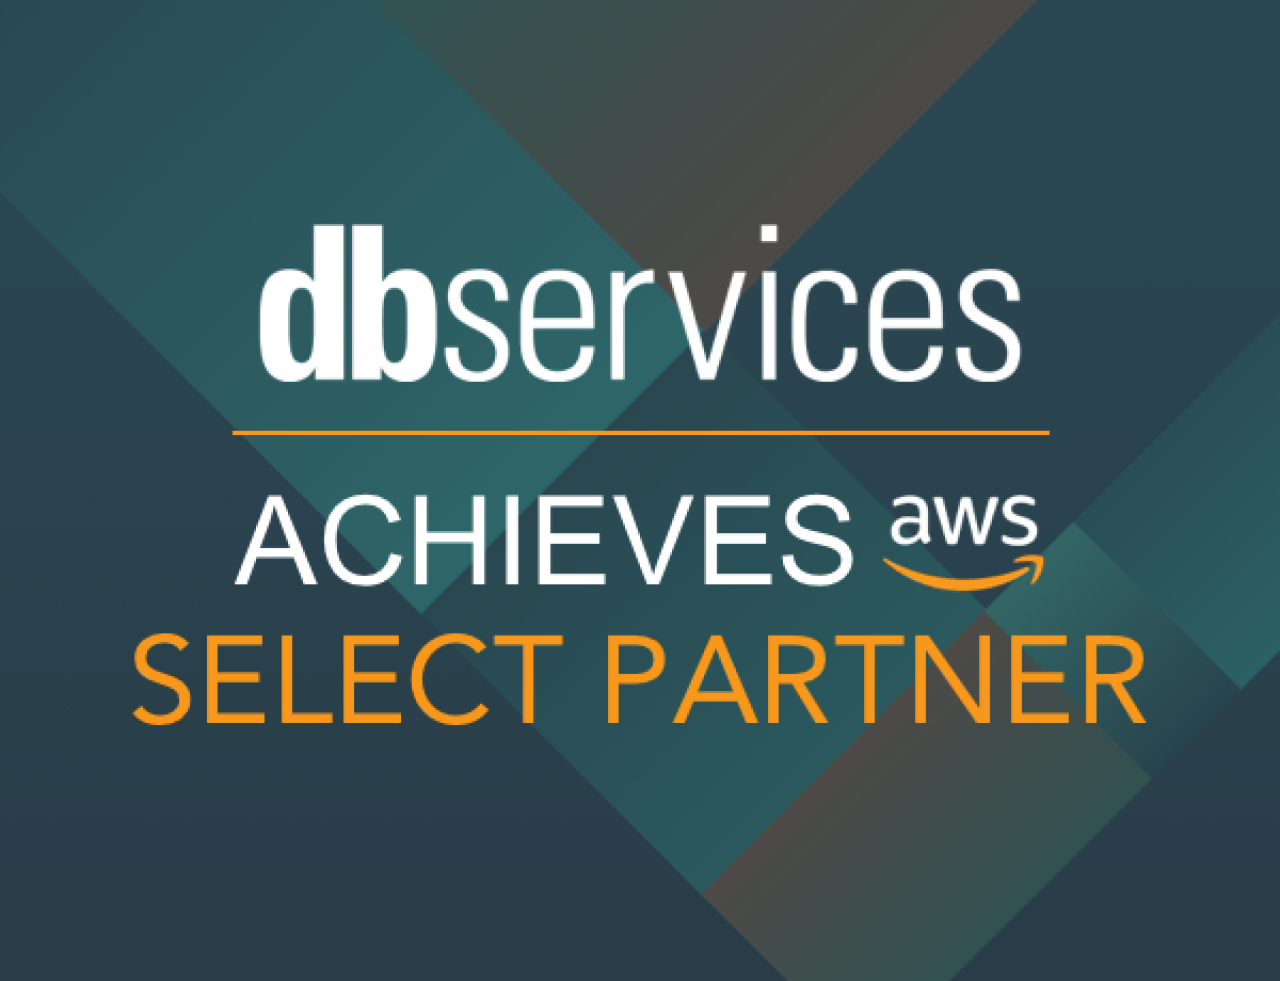 db services achieves aws select partner.